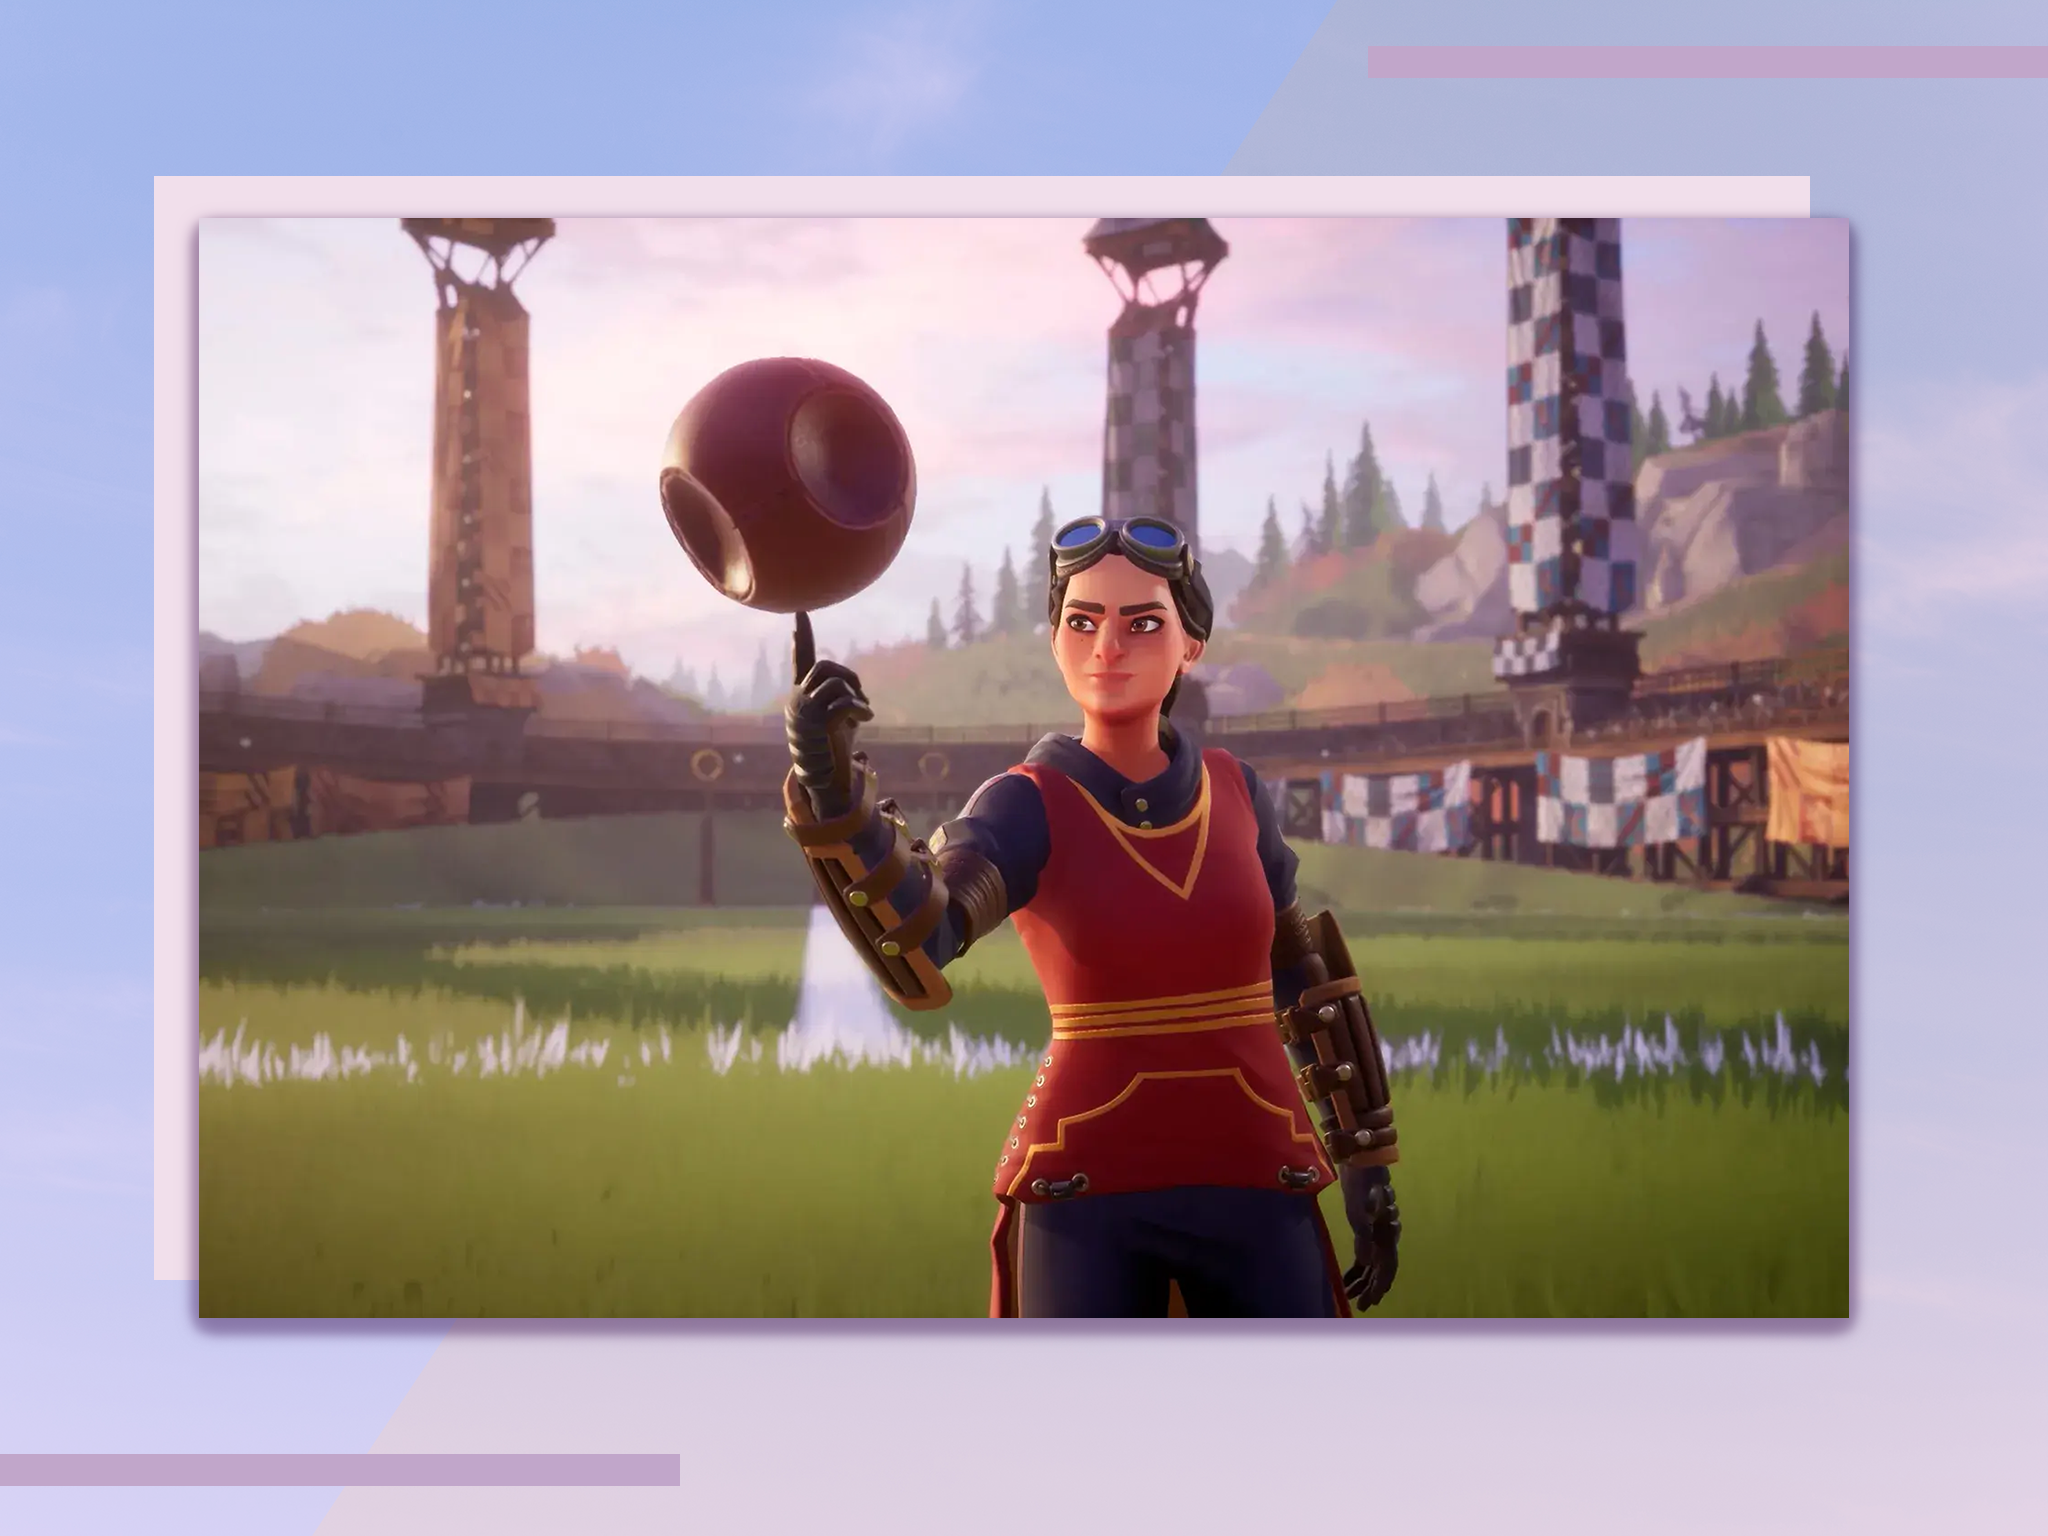 Harry Potter: Quidditch World Cup